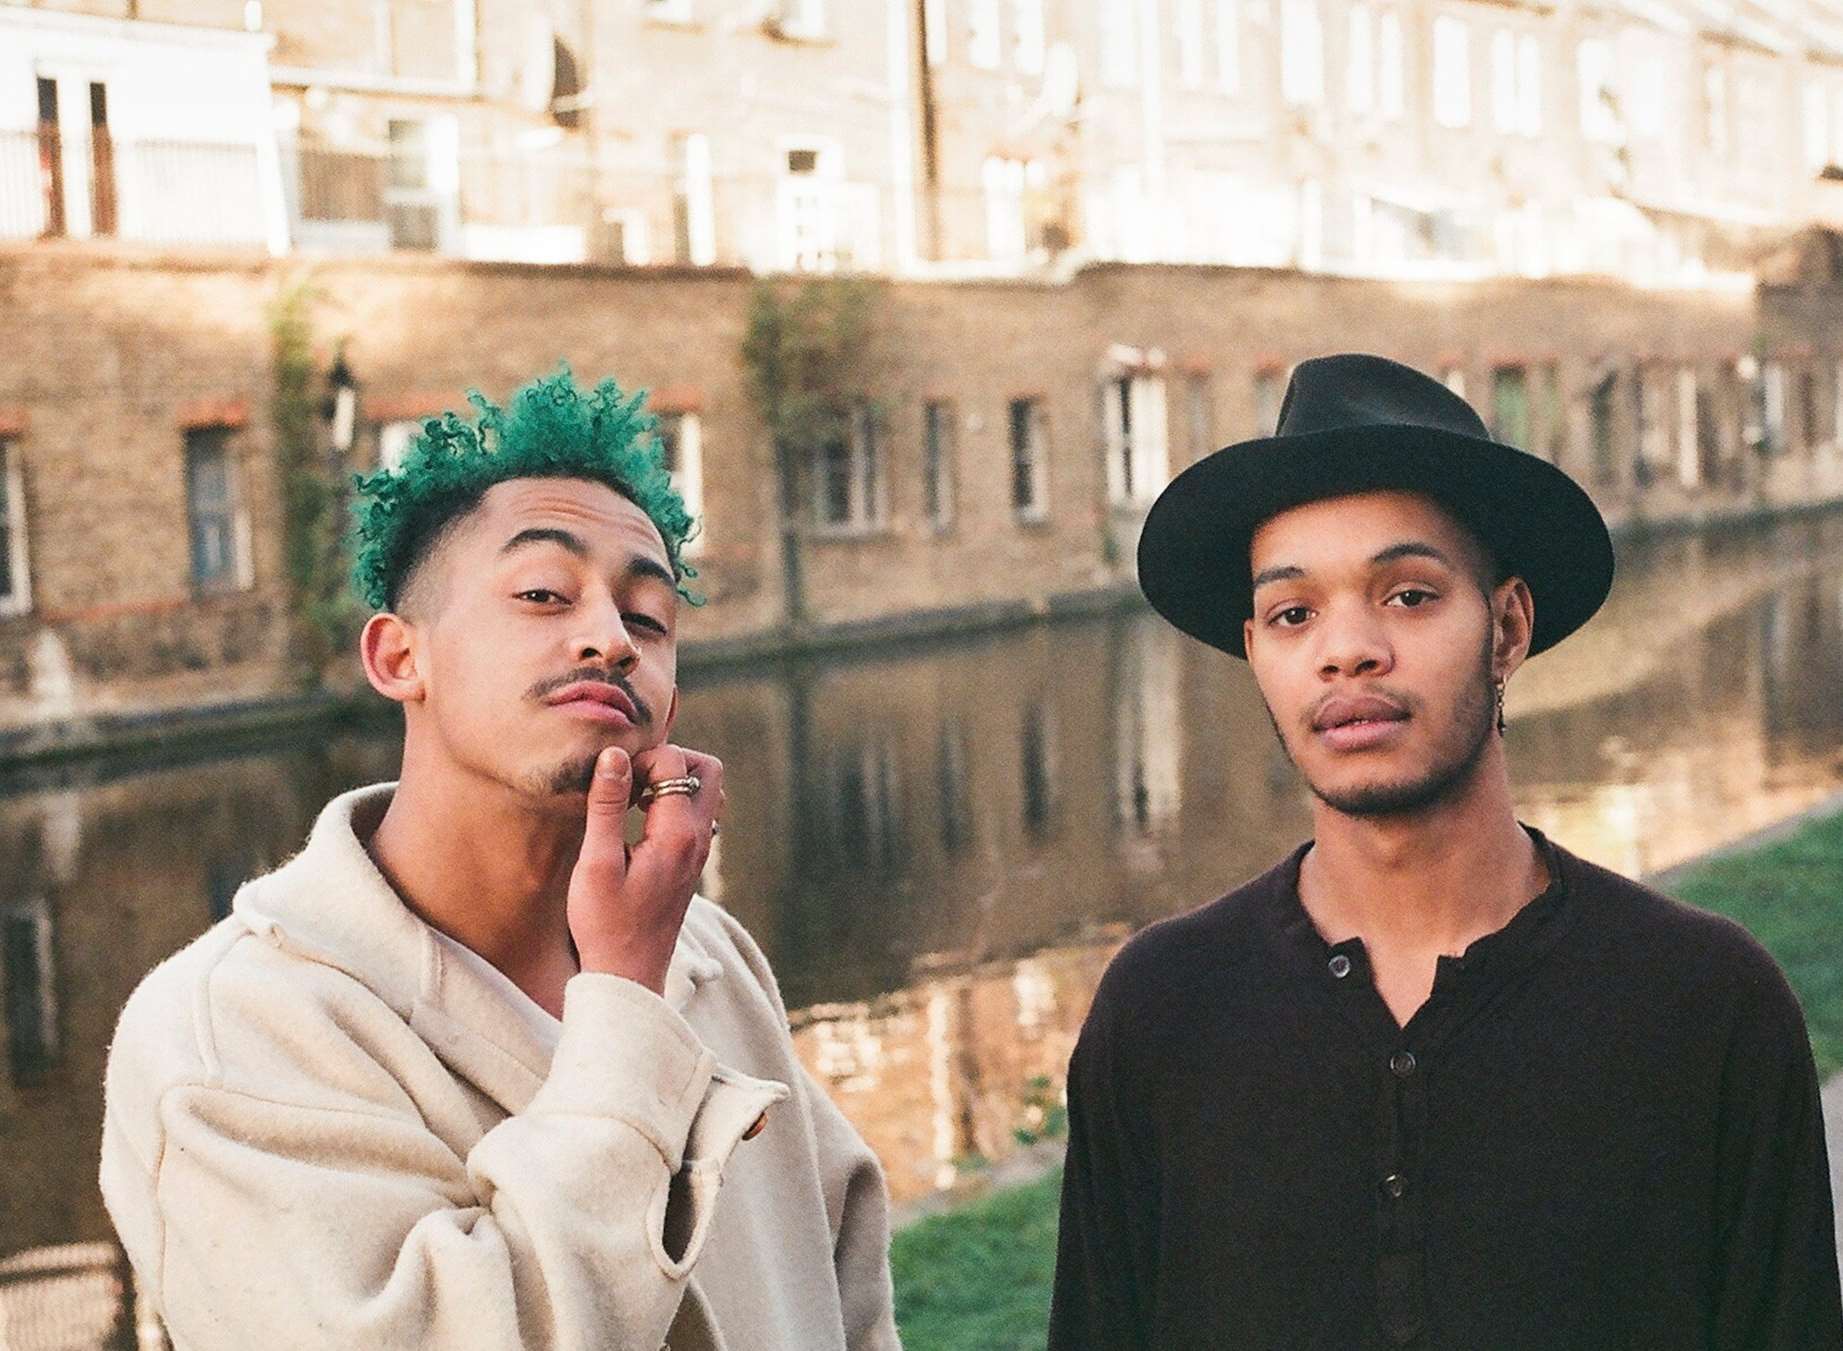 Rizzle Kicks are to play Folkestone later this year